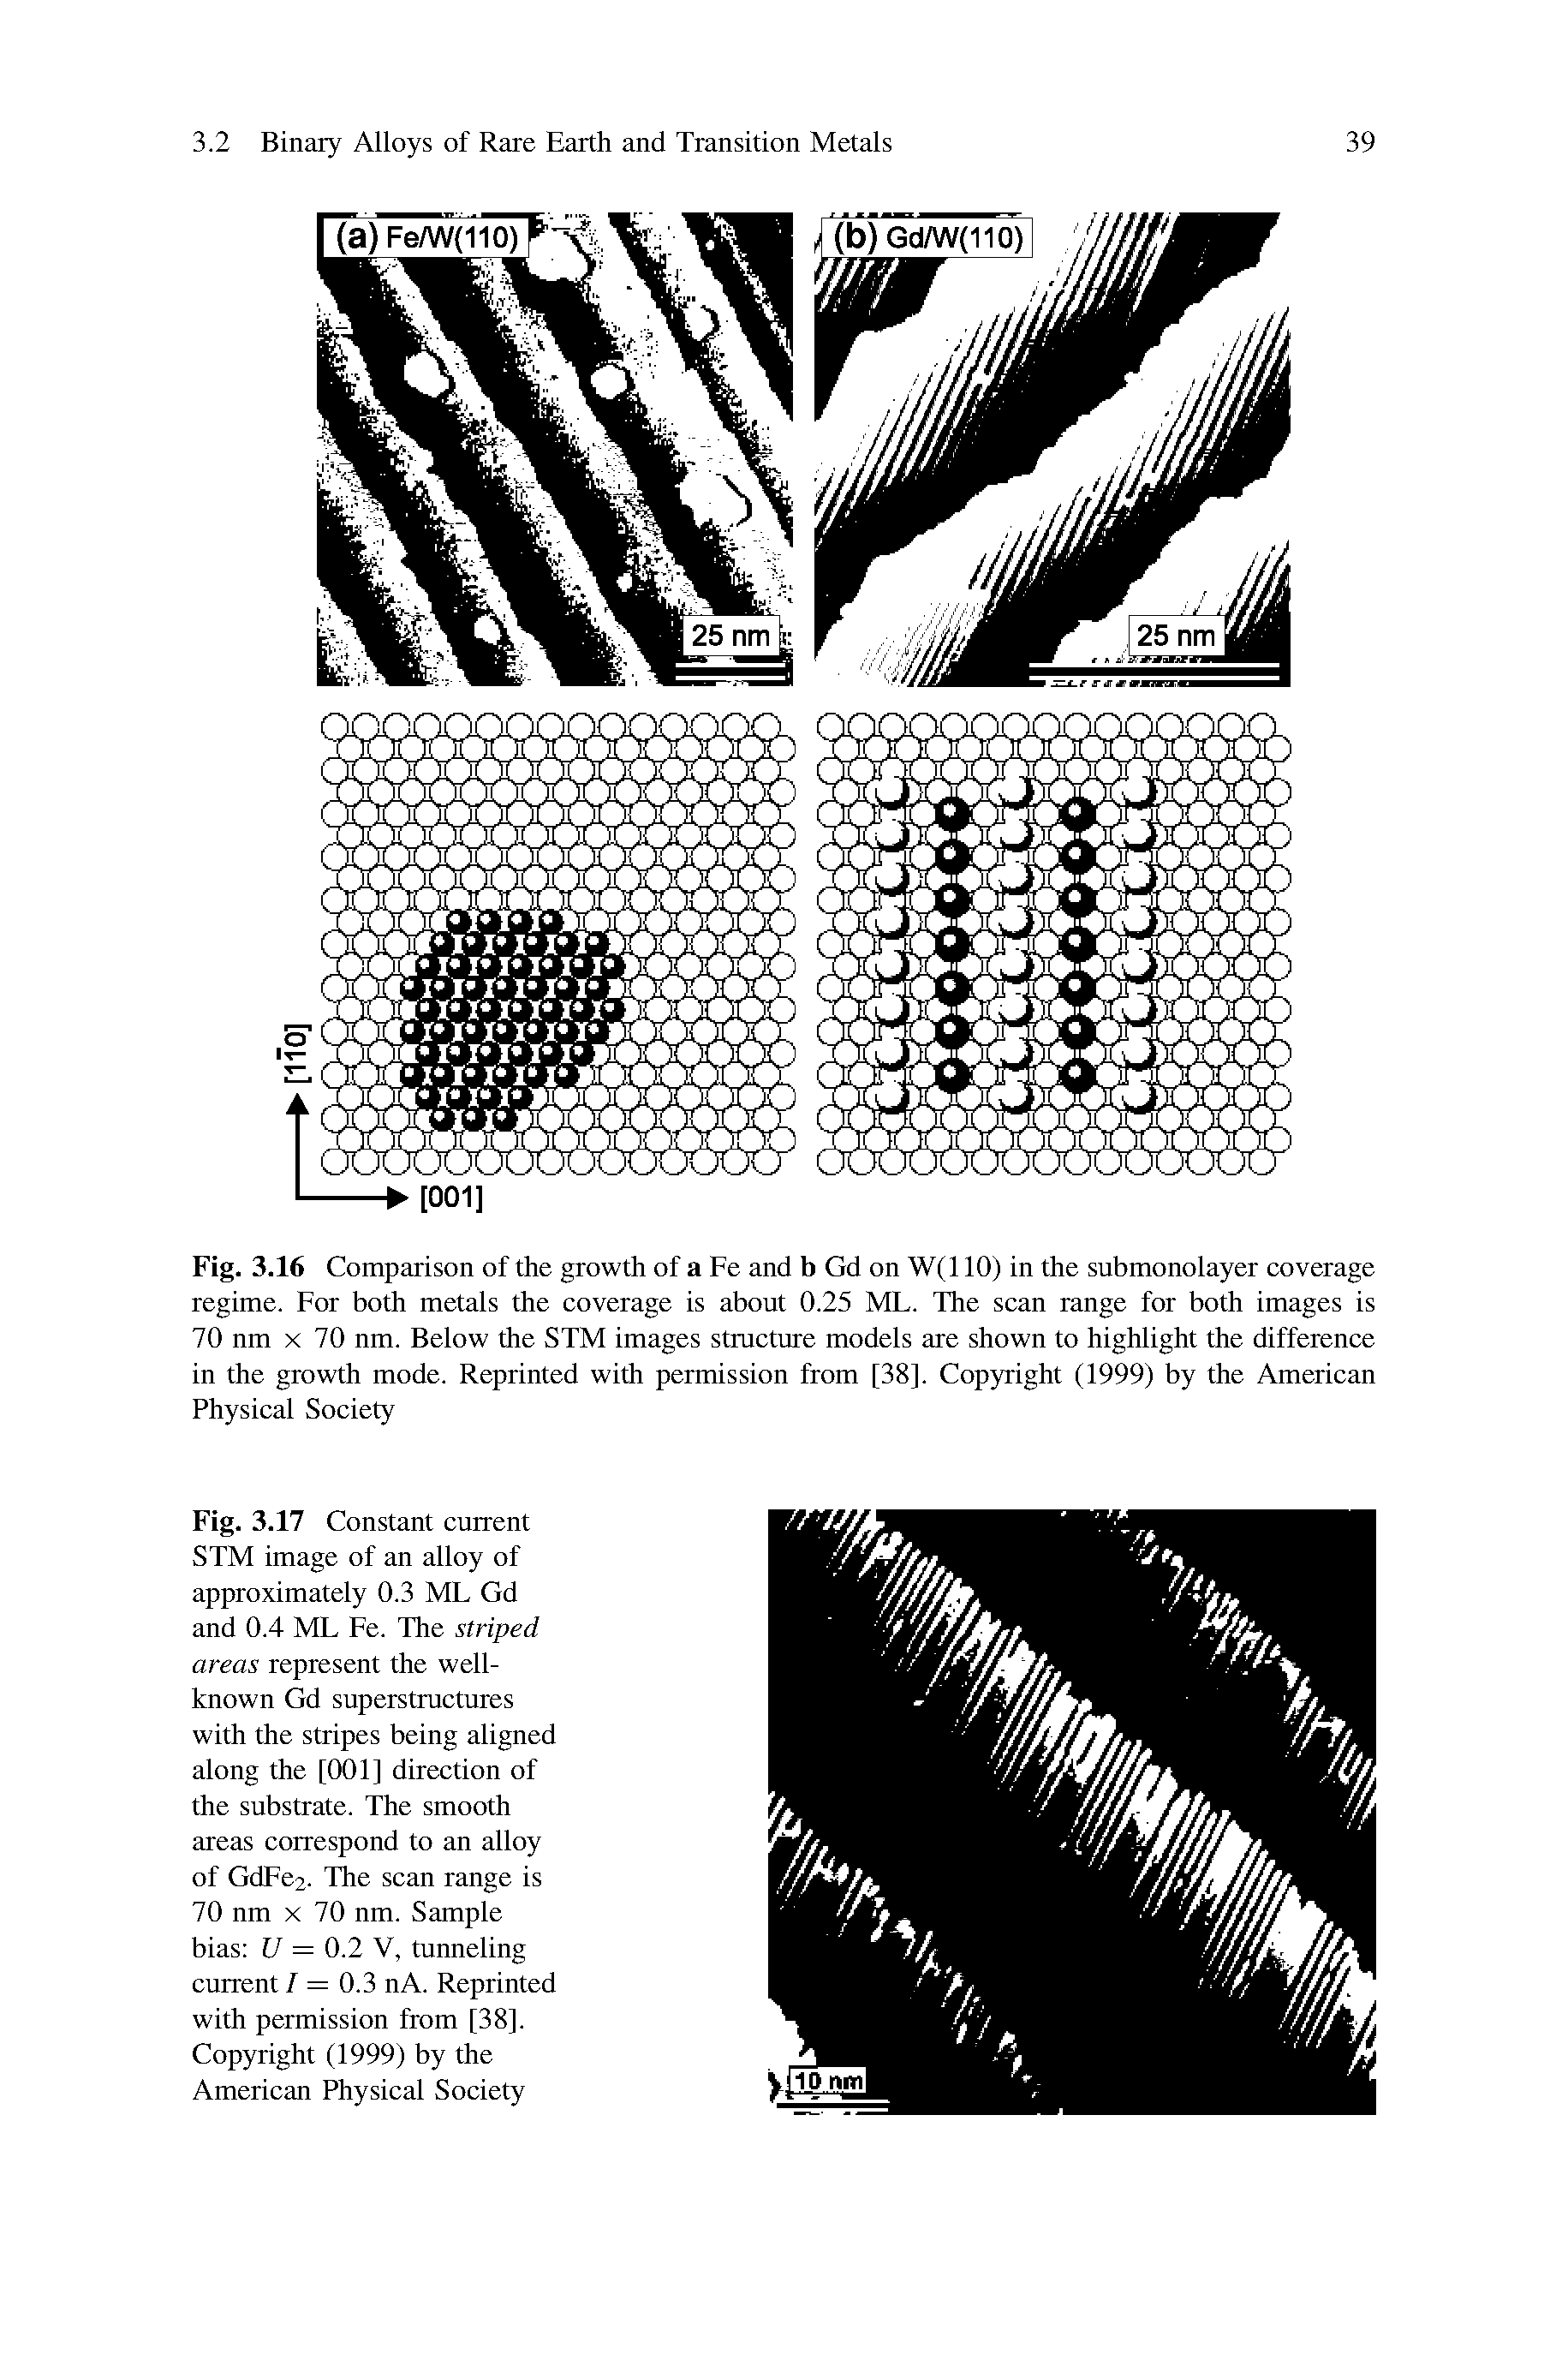 Fig. 3.17 Constant current STM image of an alloy of approximately 0.3 MF Gd and 0.4 MF Fe. The striped areas represent the well-known Gd superstructures with the stripes being aligned along the [001] direction of the substrate. The smooth areas correspond to an alloy of GdFc2. The scan range is 70 nm X 70 nm. Sample bias U = 0.2 V, tunneling current / = 0.3 nA. Reprinted with permission from [38]. Copyright (1999) by the American Physical Society...